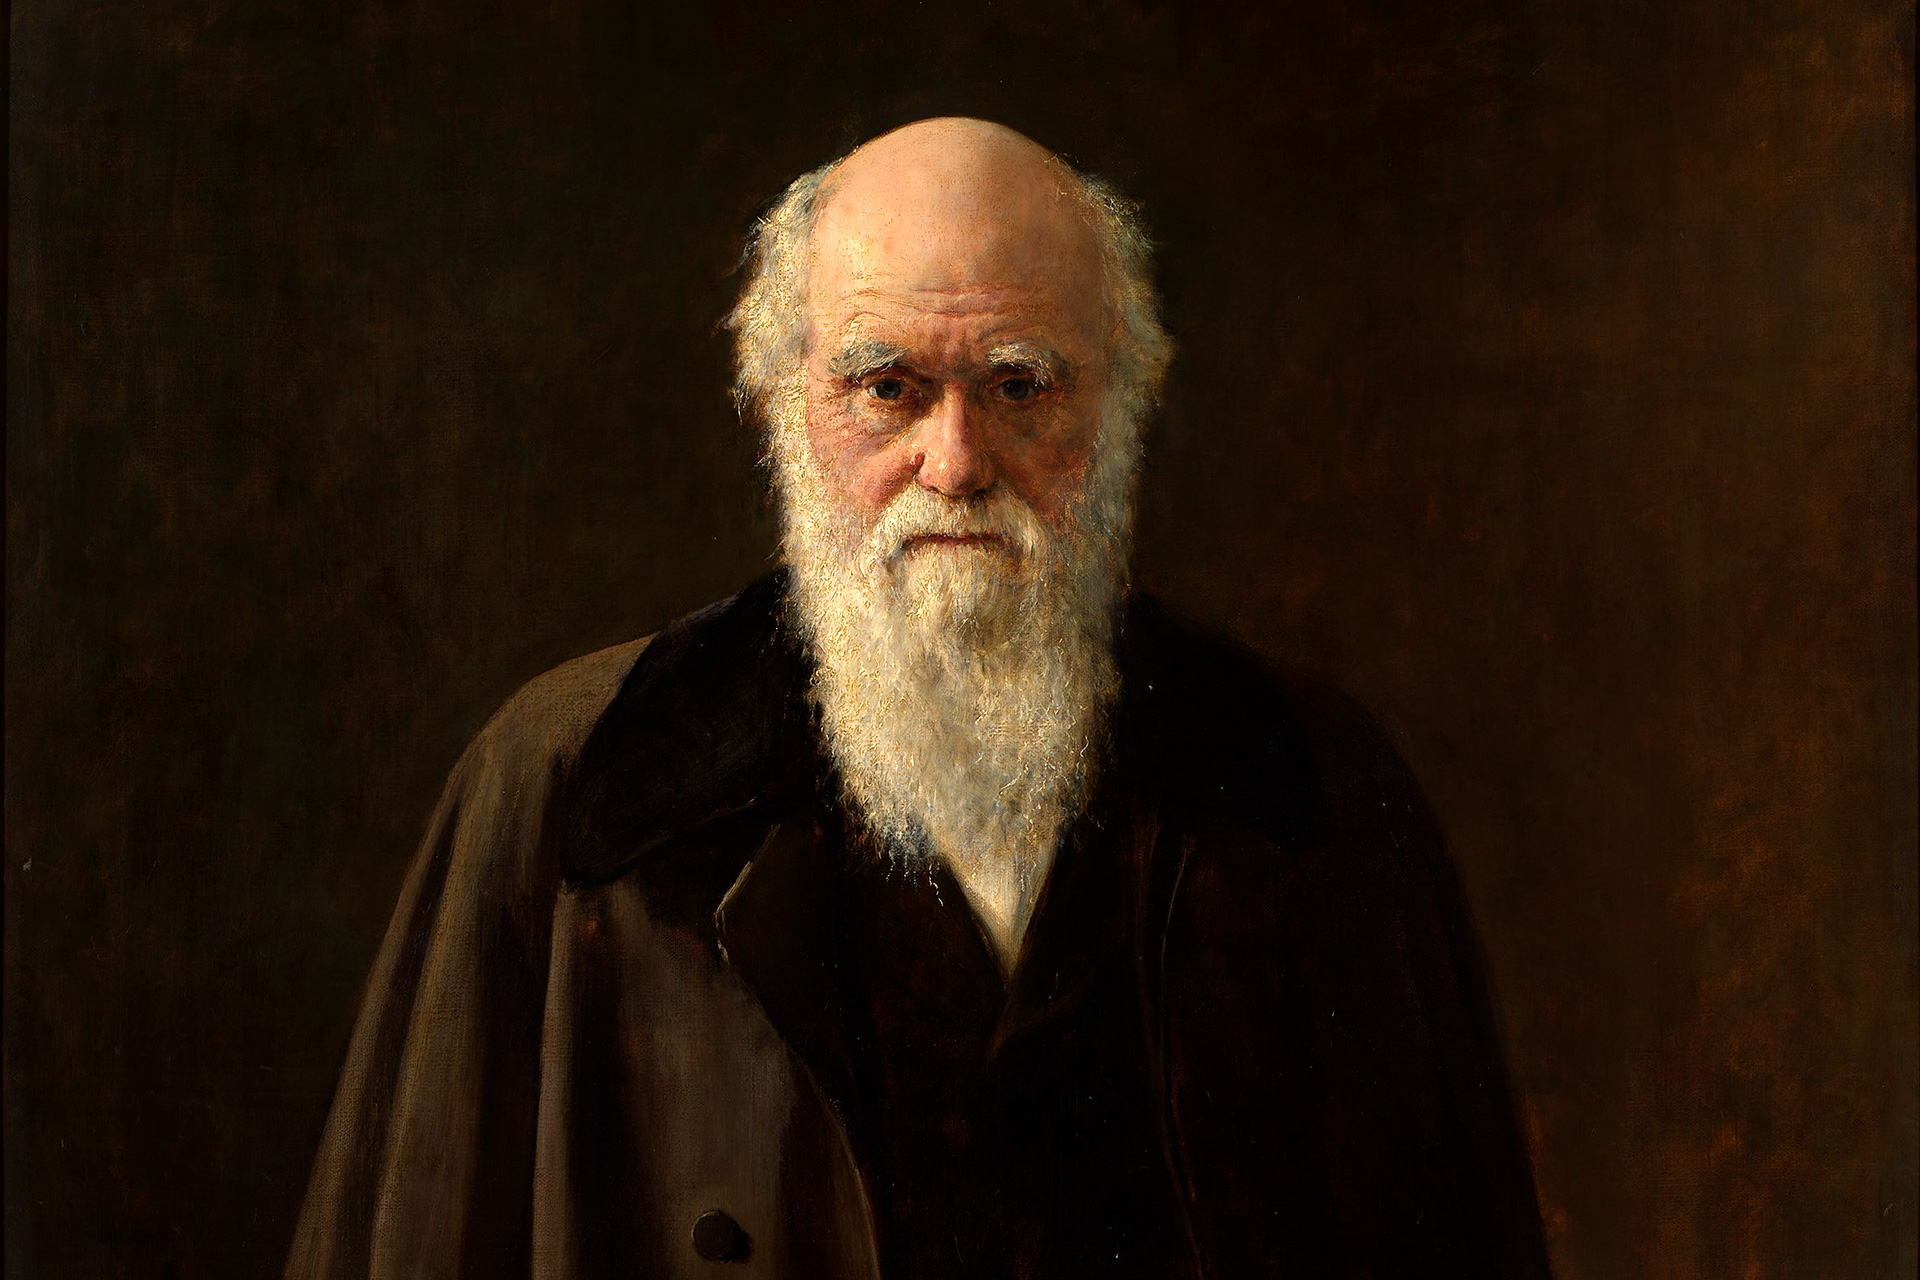 The full correspondence of Charles Darwin is now available online